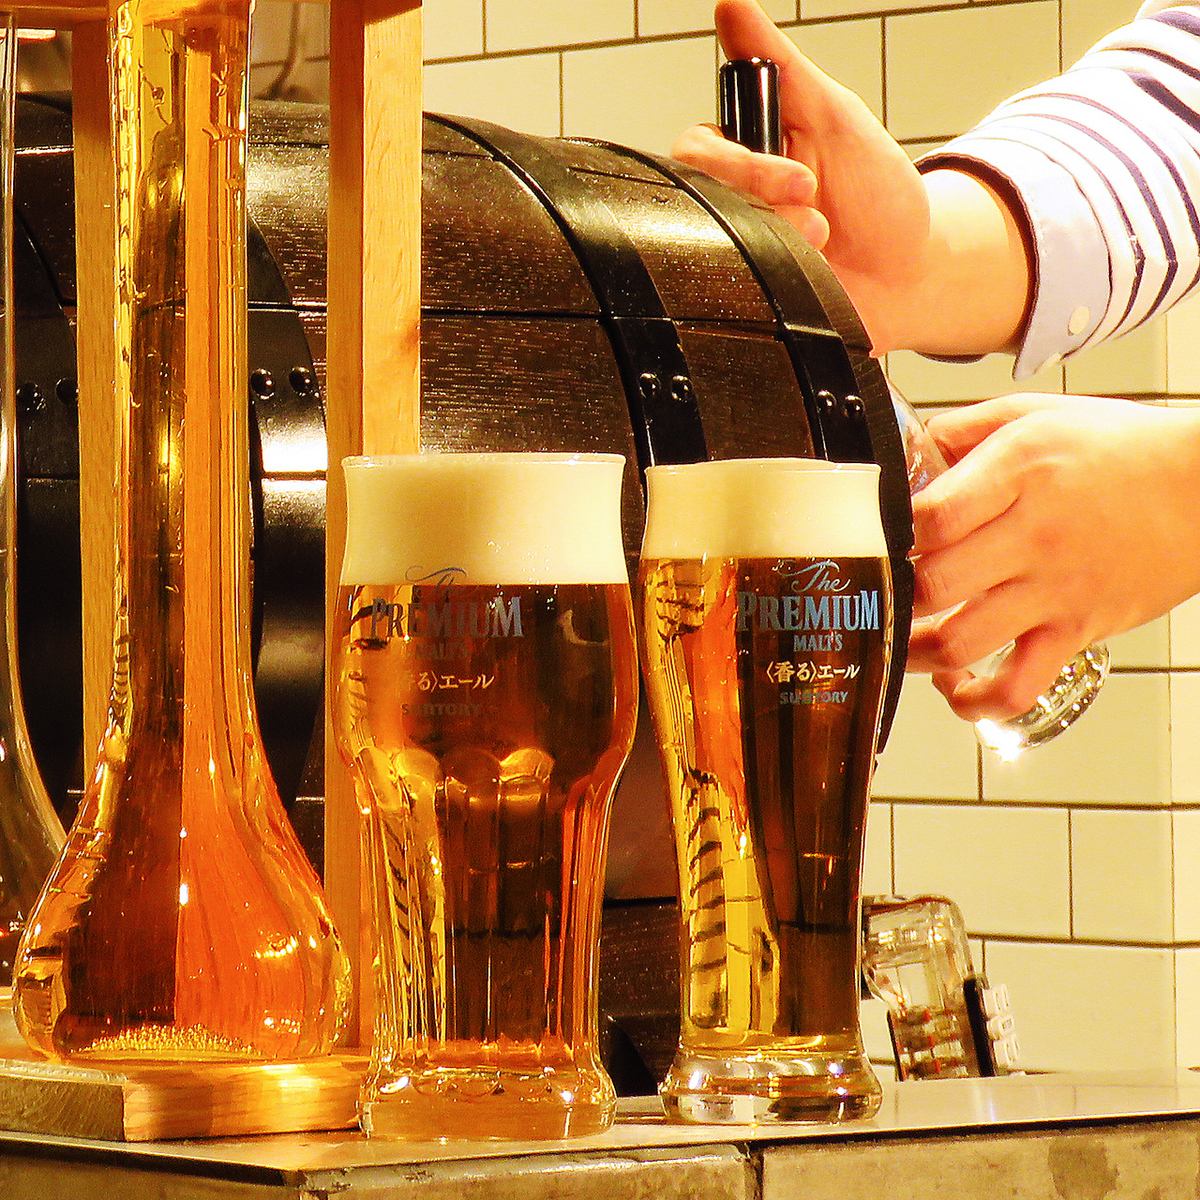 Draft beer and sparkling are also available! All-you-can-drink for 2 hours ★1,848 JPY (incl. tax)